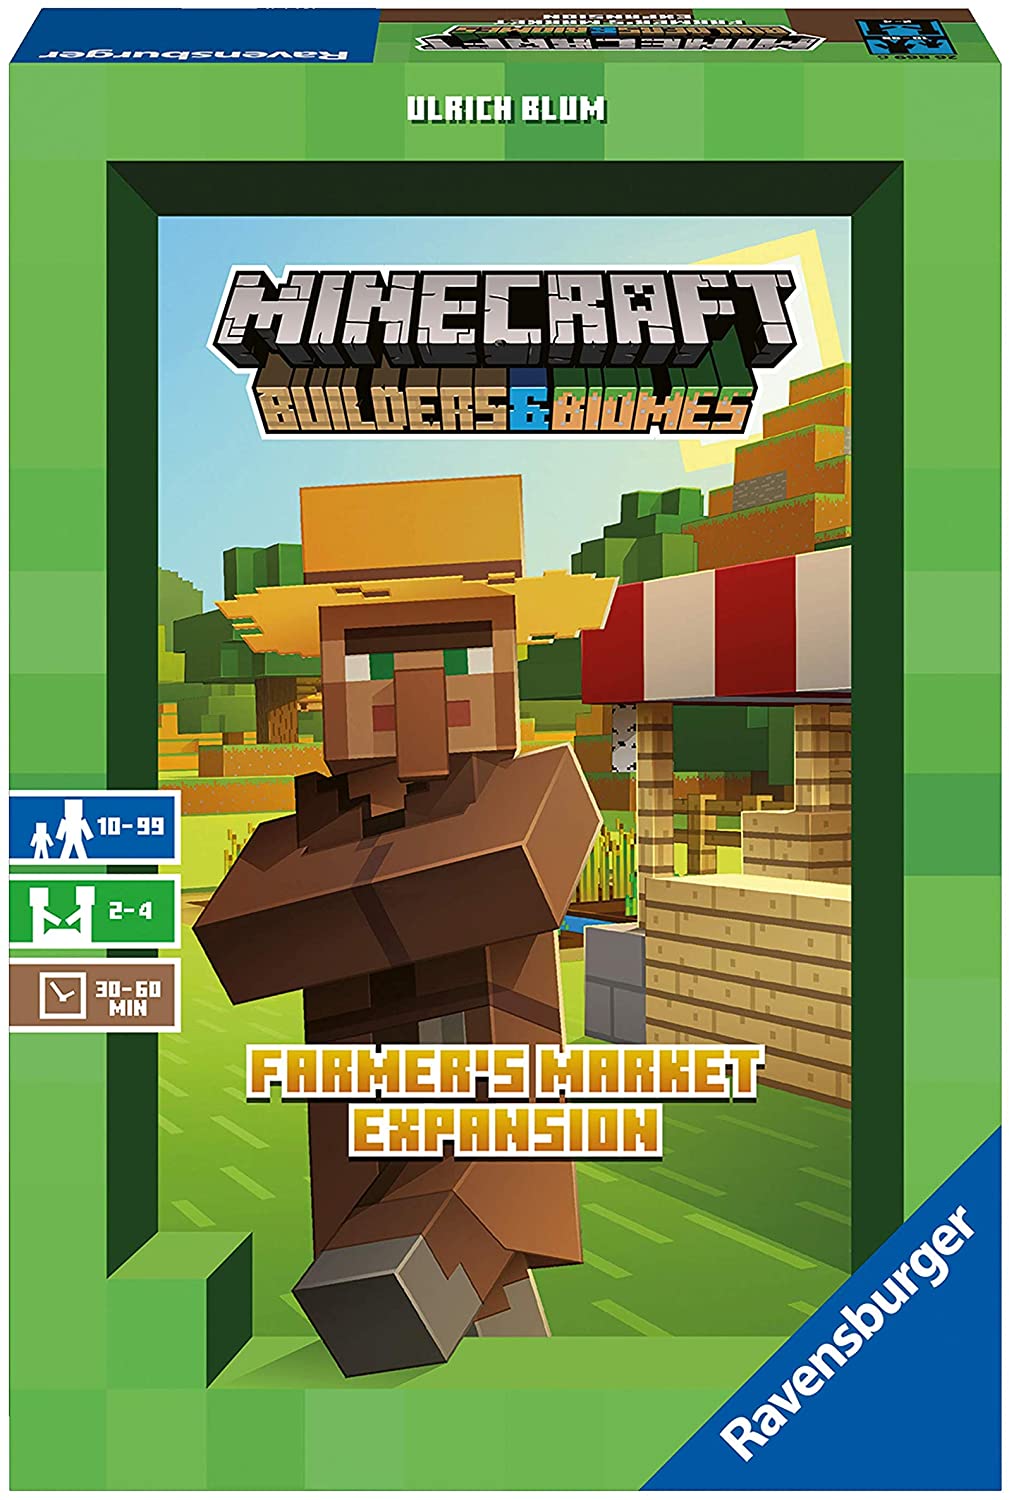 Minecraft: Builders & Biomes - Farmer's Market expansion